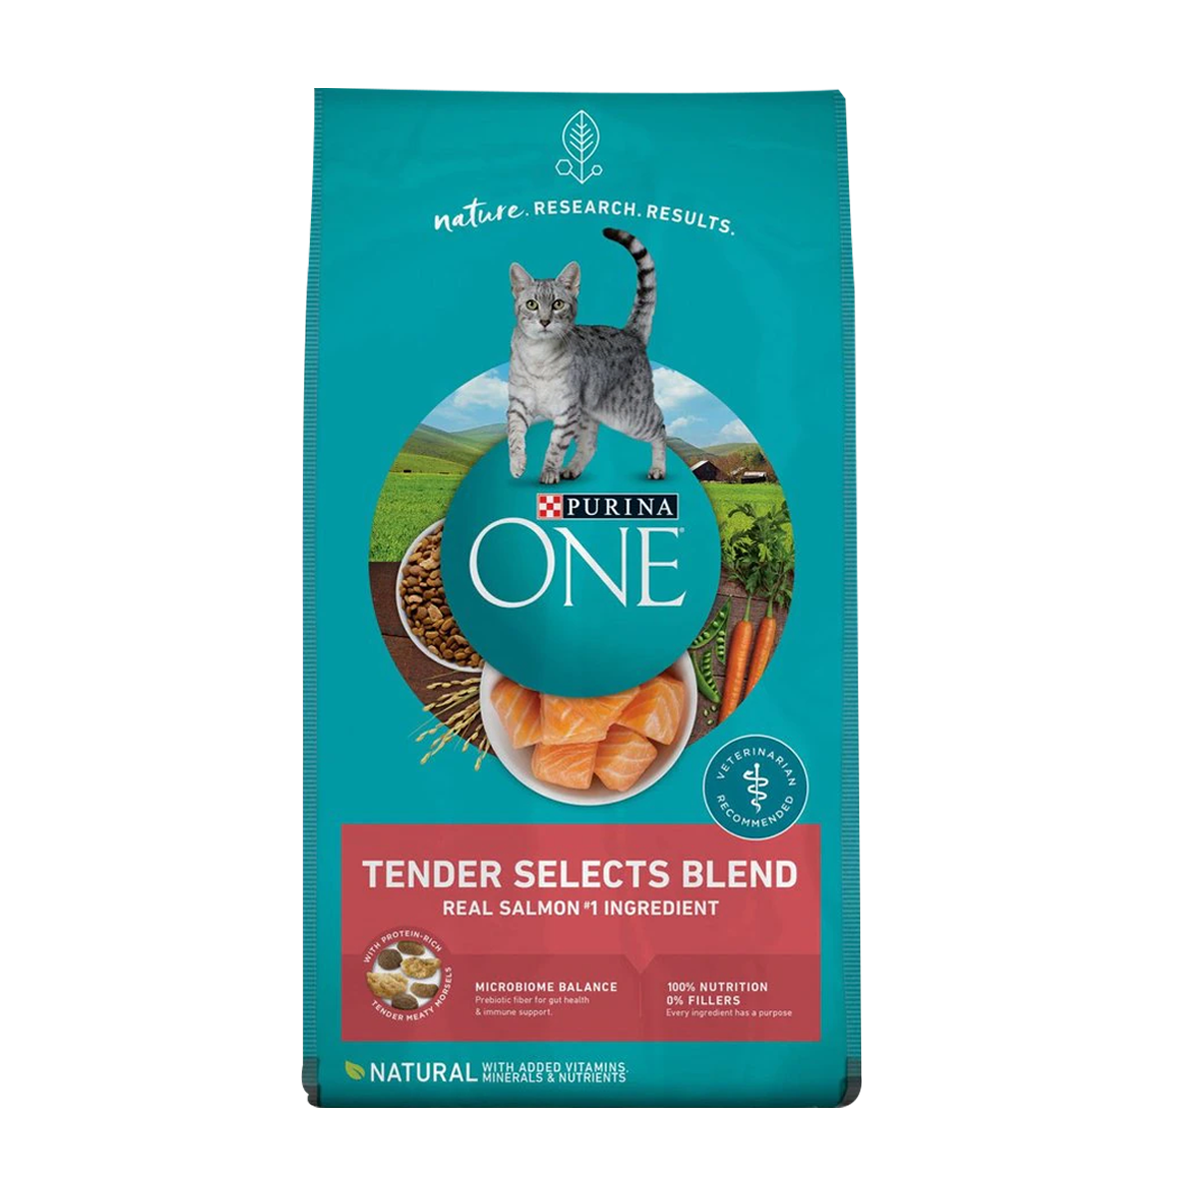 Purina-One-cat-tender-selects-salmon.png